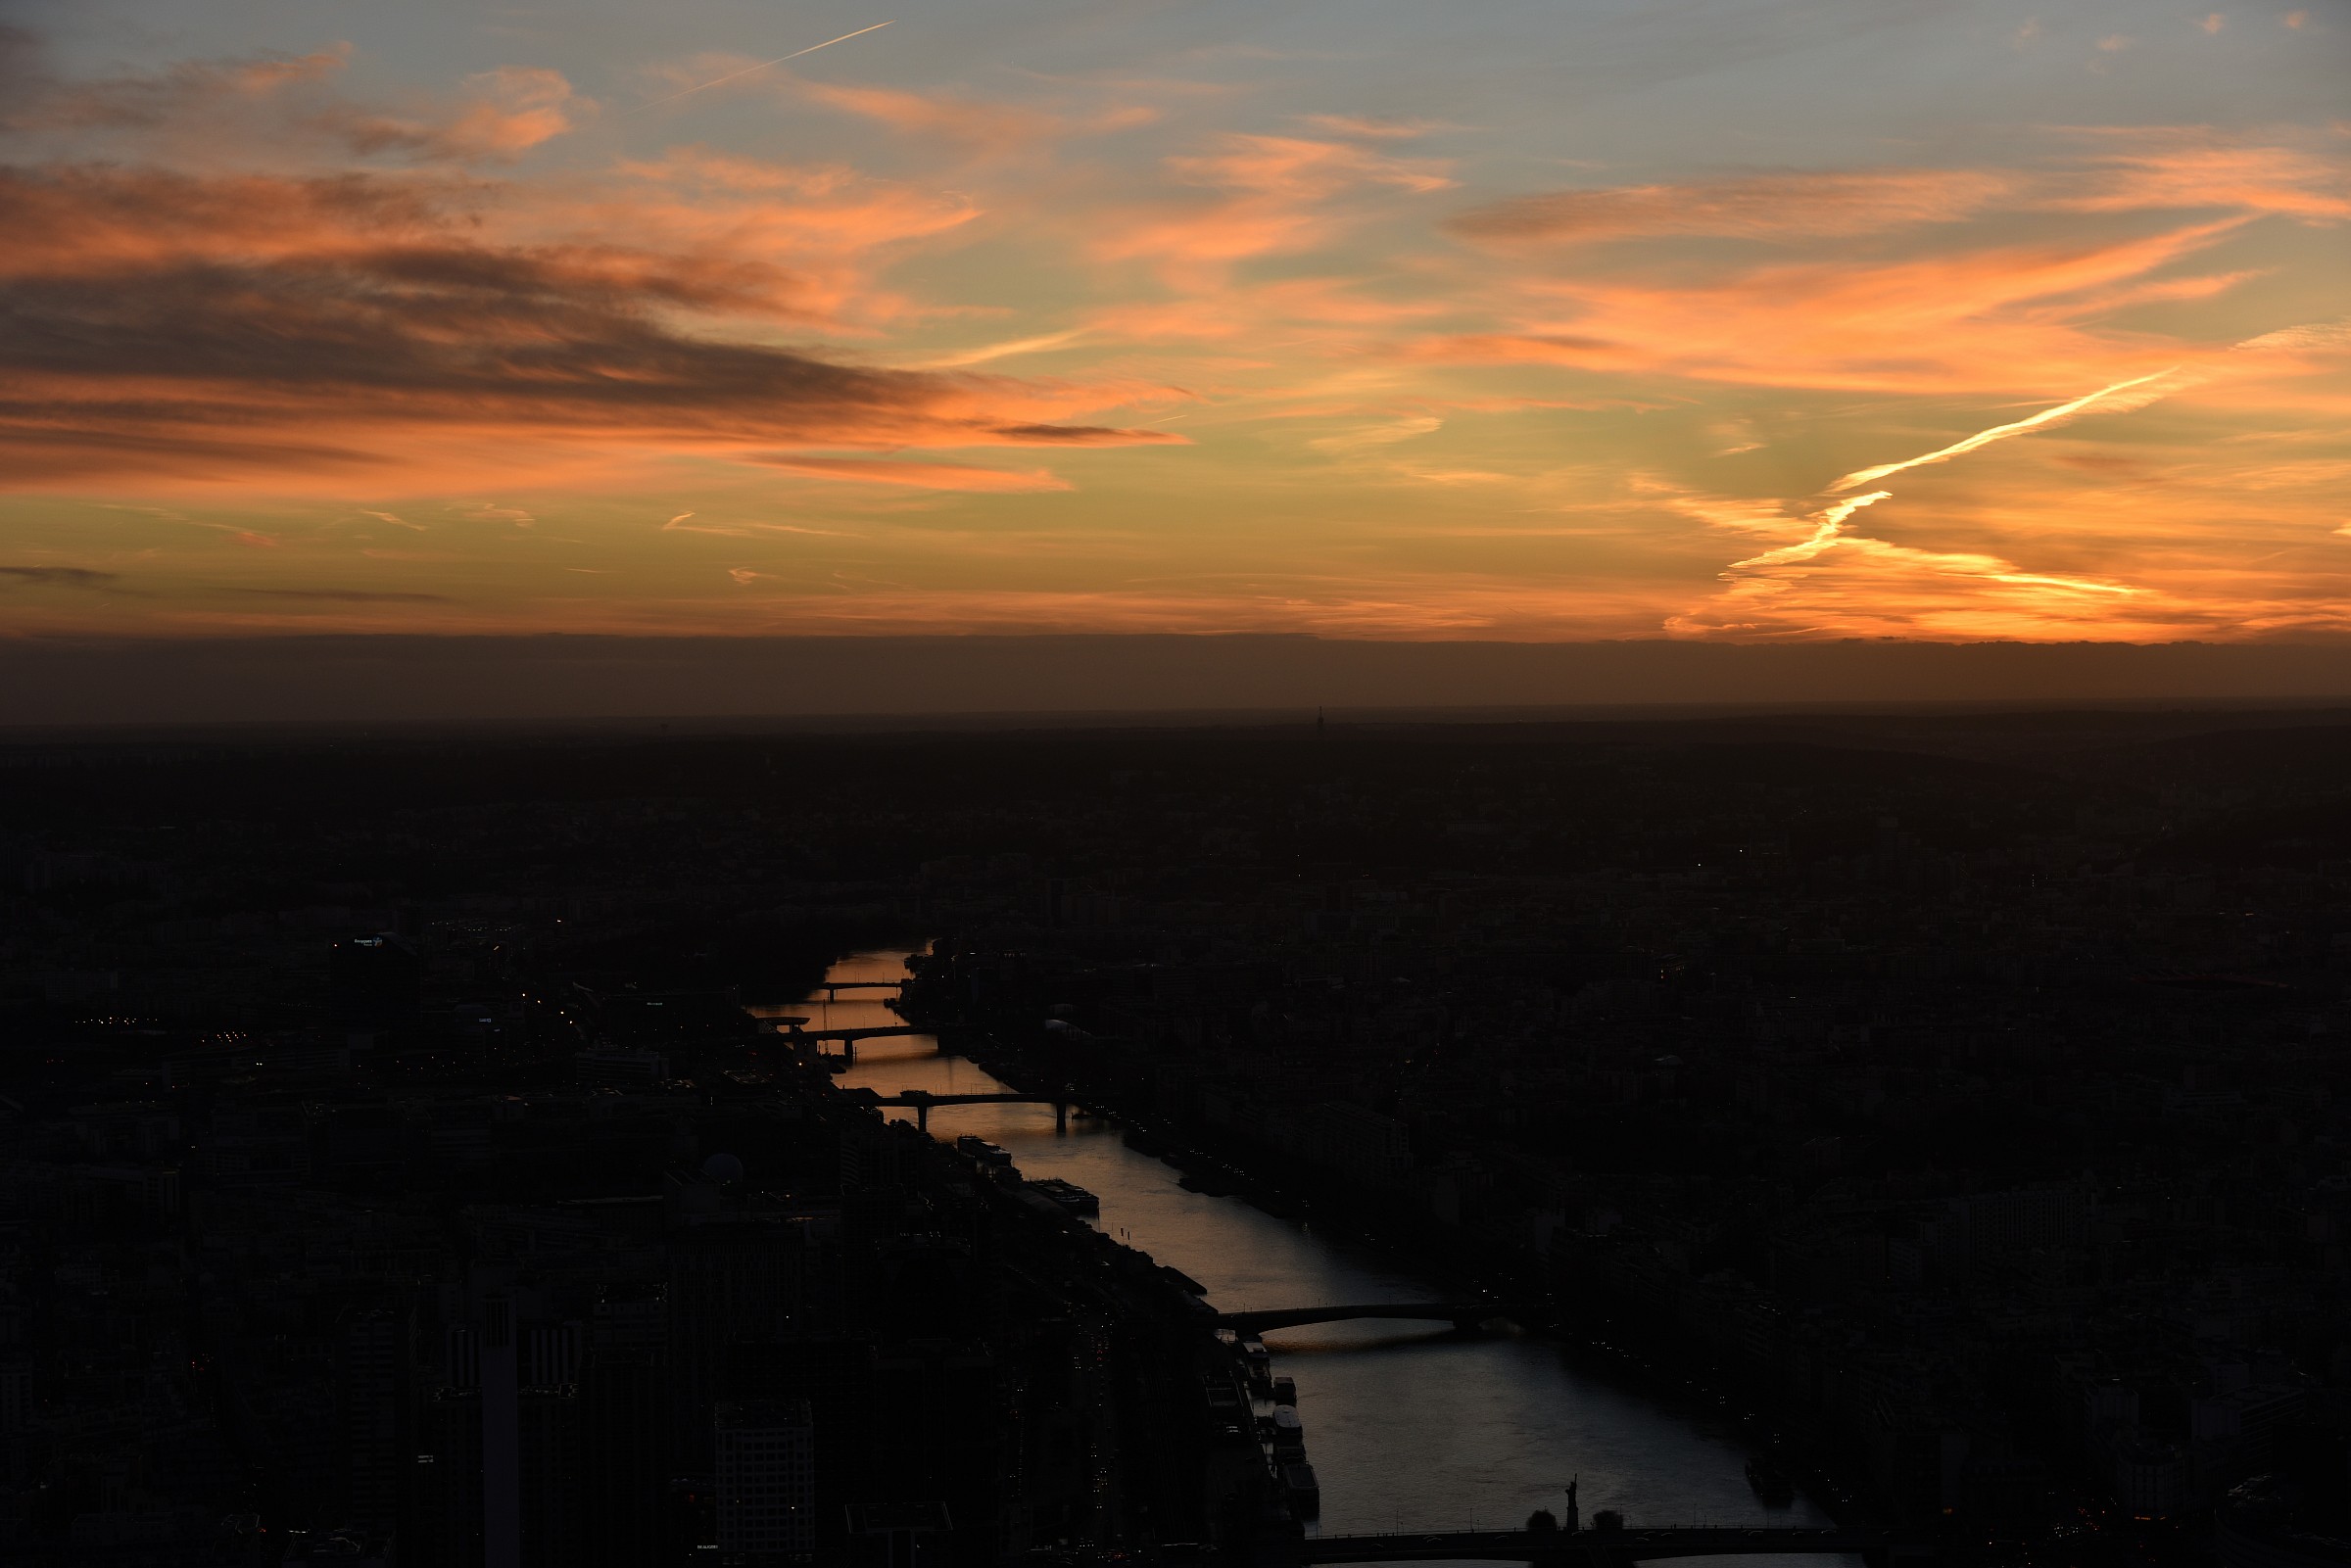 Paris - Sunset from the Eiffel tower...